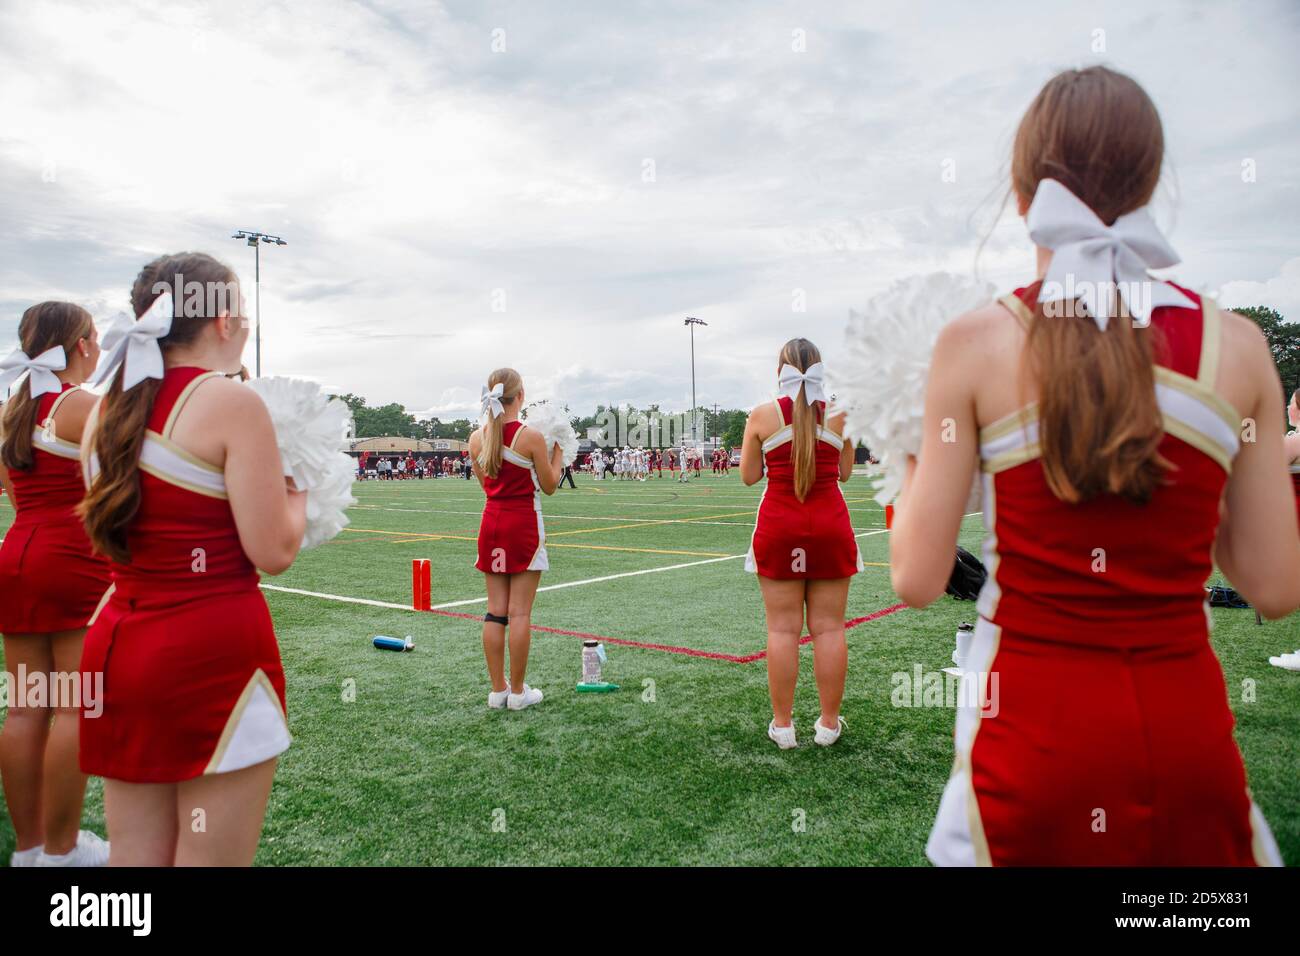 A group of cheerleaders with bows in hair stand on football field Stock Photo